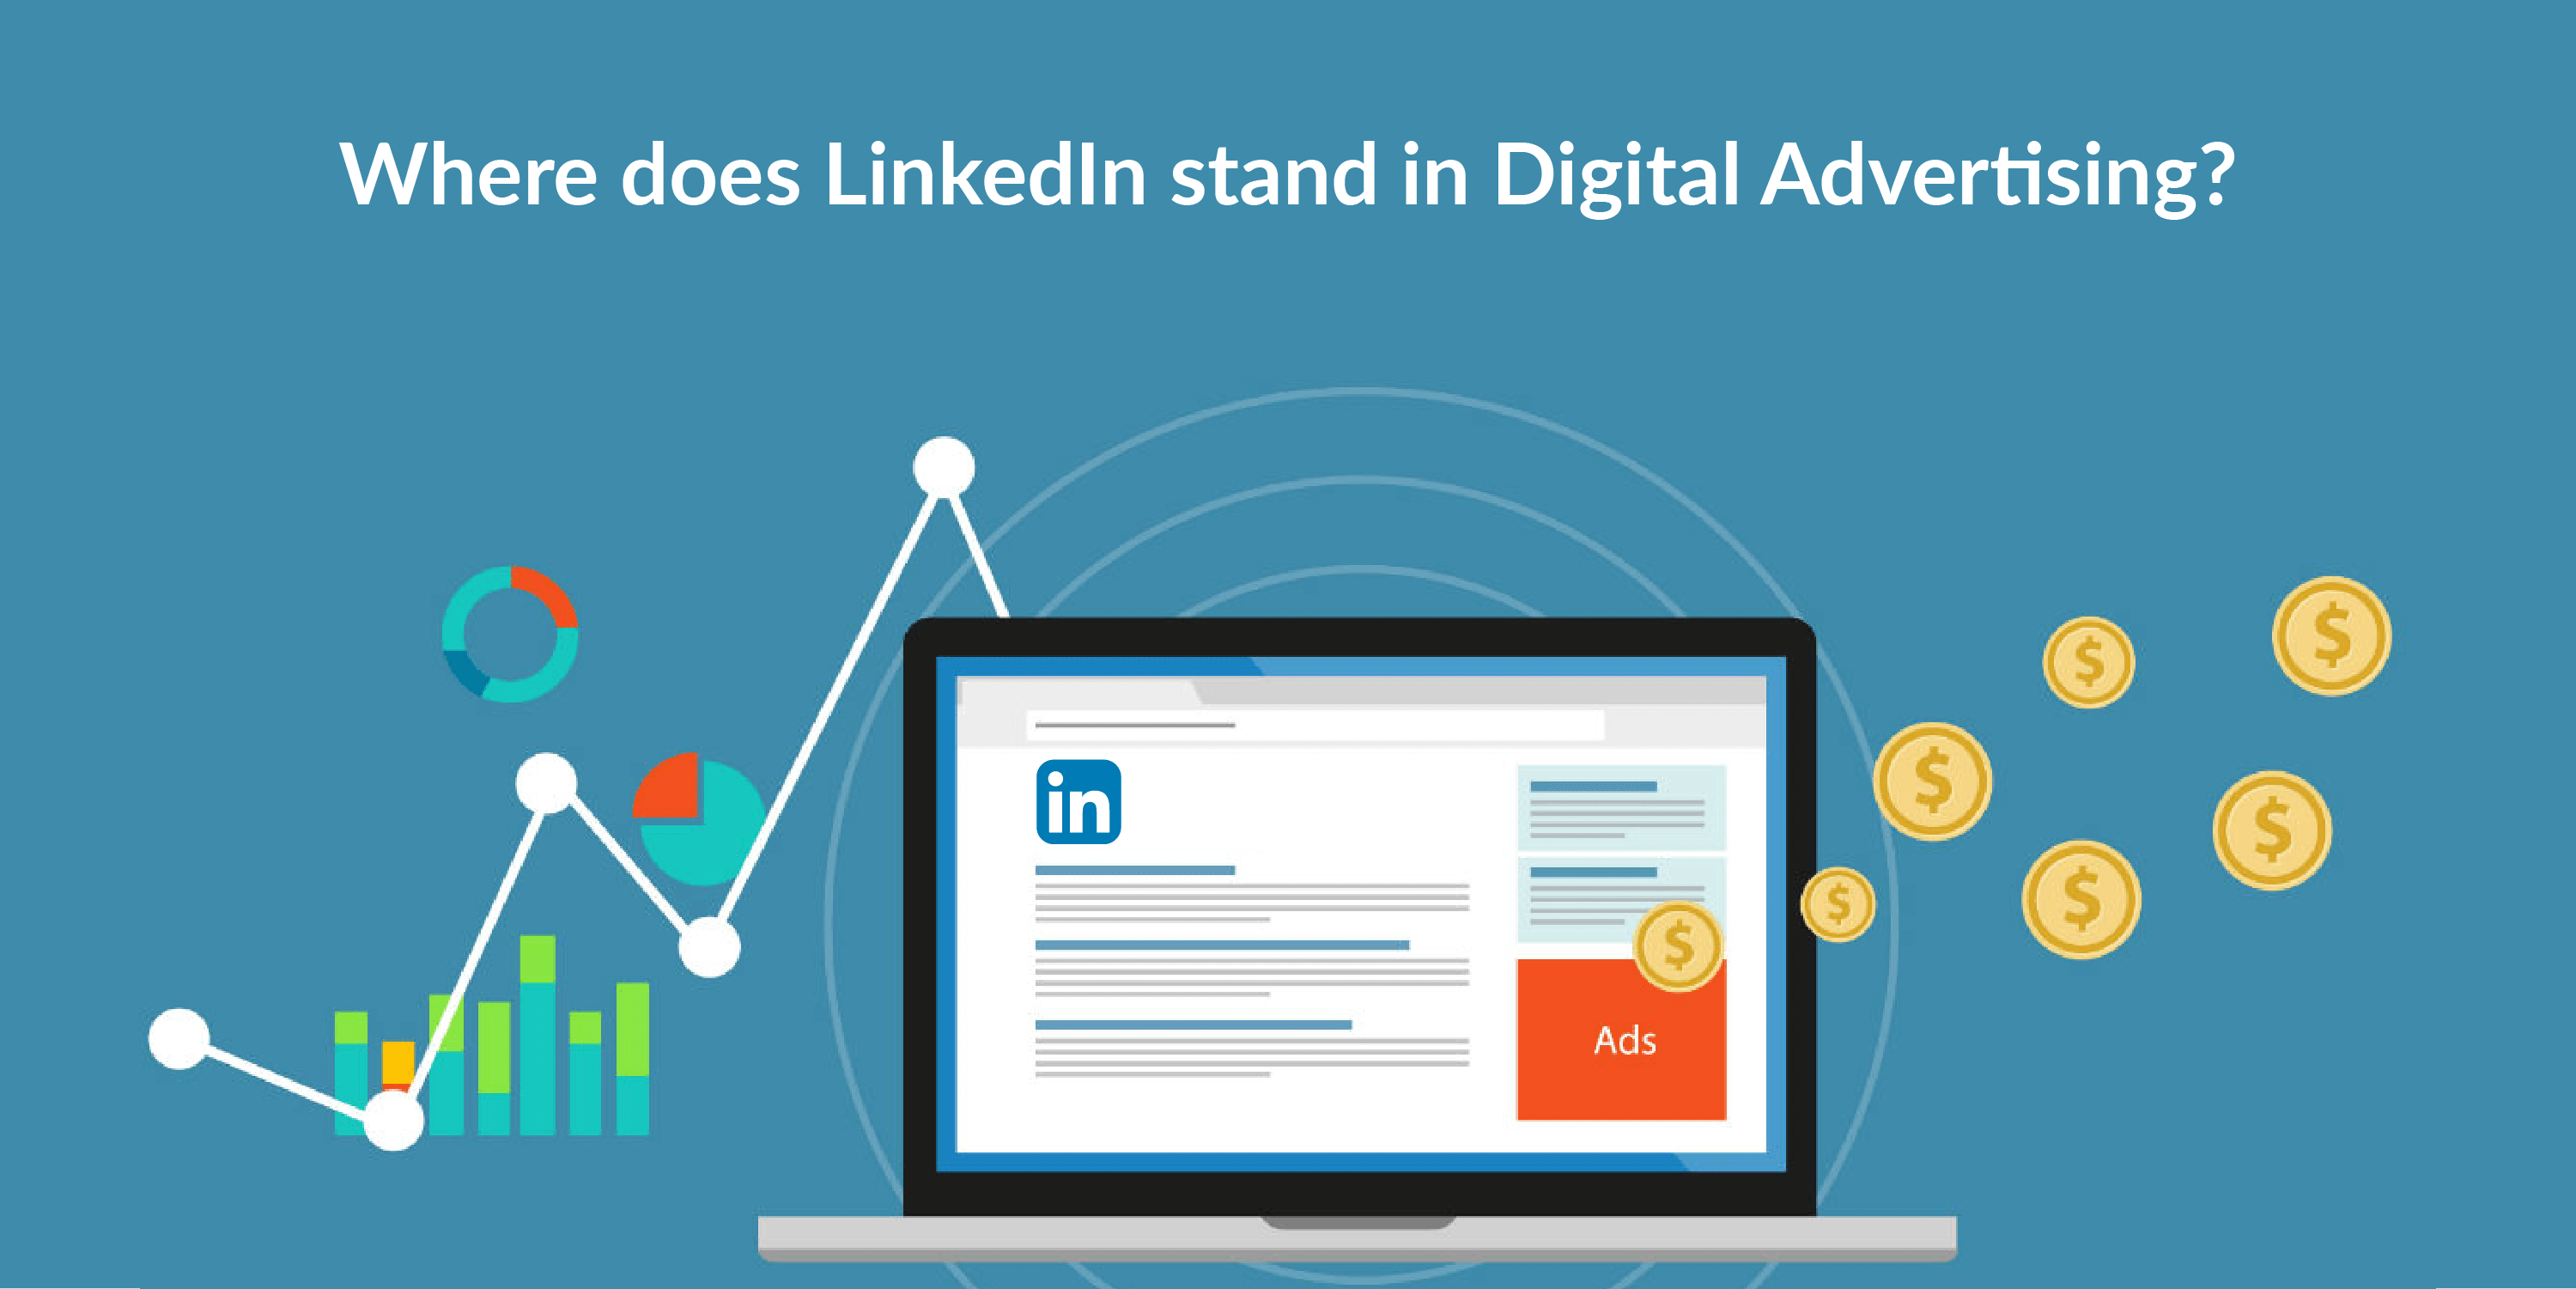 WHERE DOES LINKEDIN STAND IN DIGITAL ADVERTISING? Carousel Ads